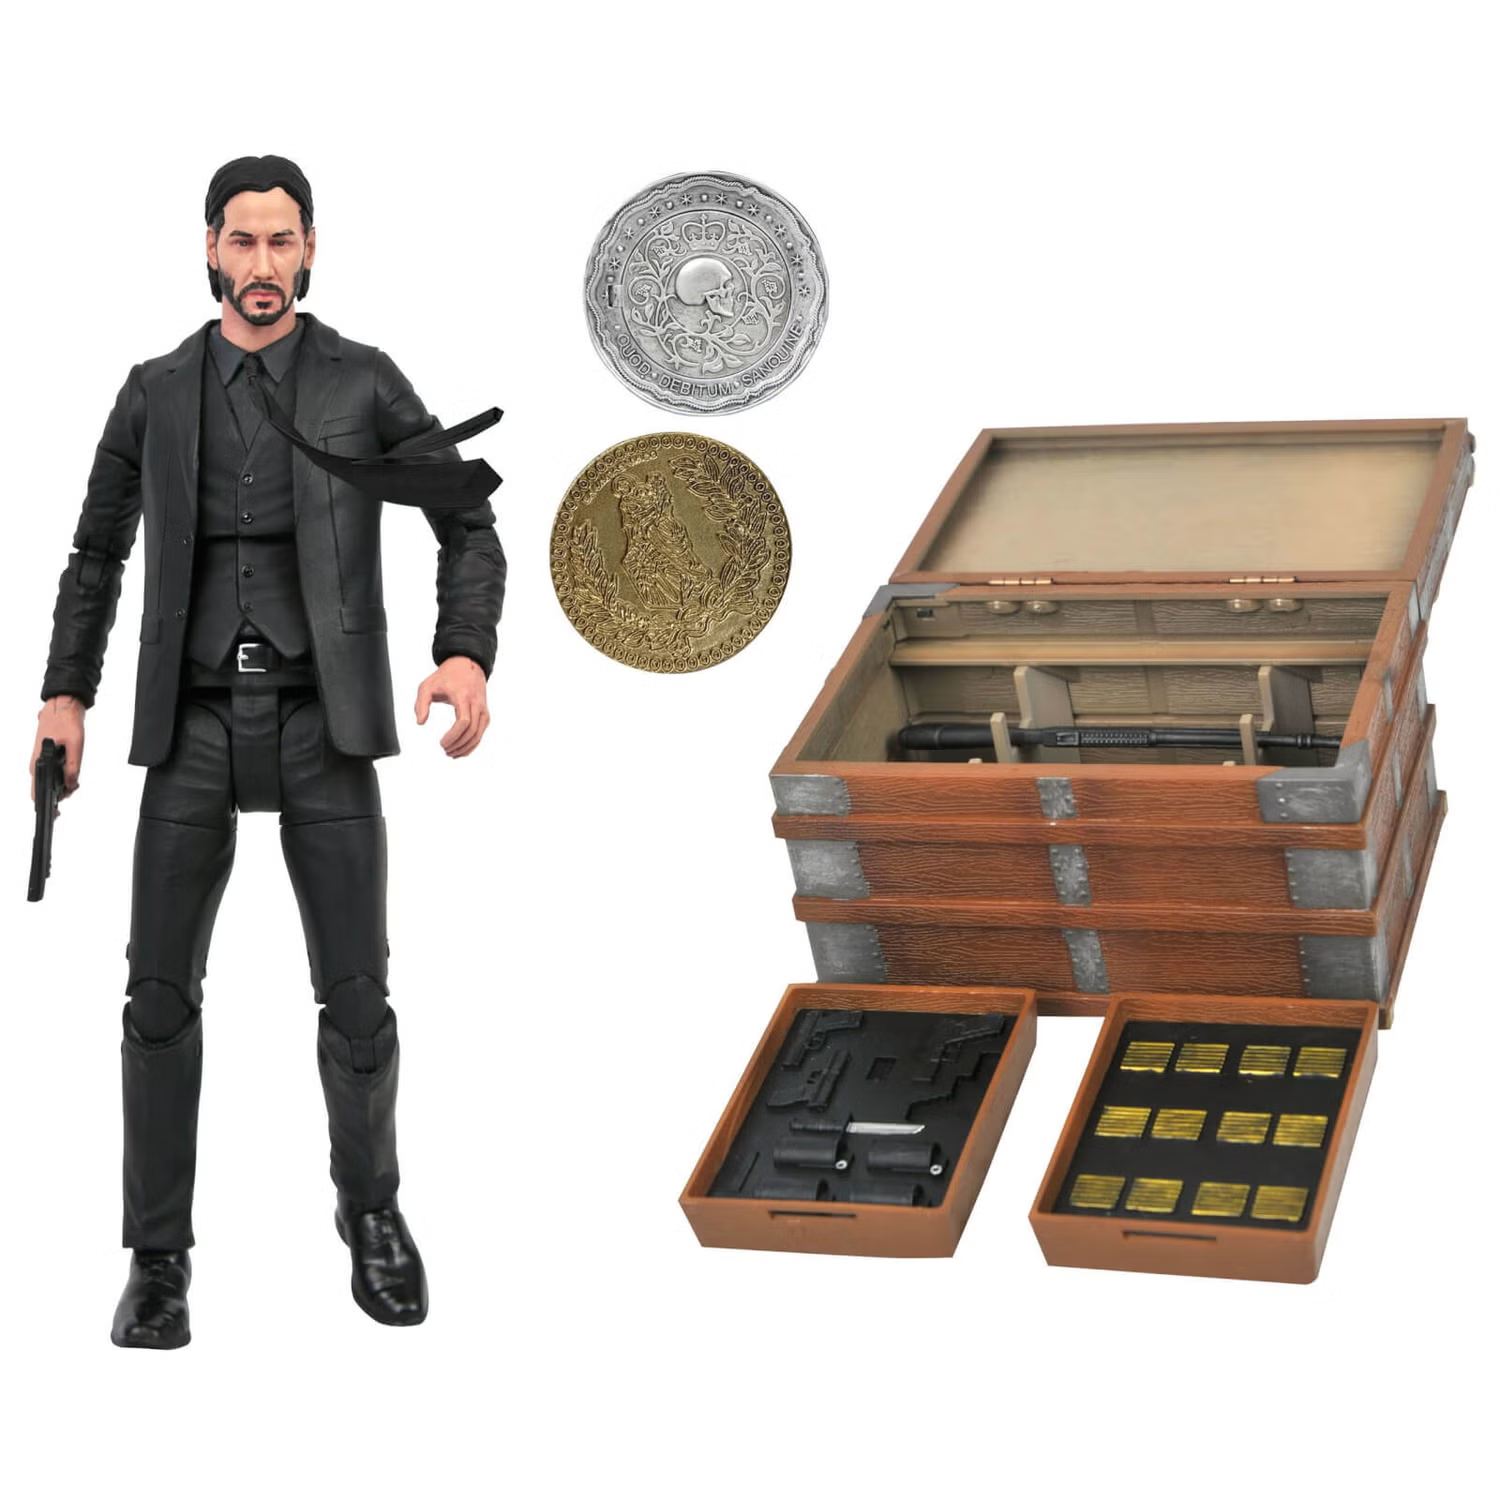 John Wick Deluxe Action Figure Set By Diamond Select